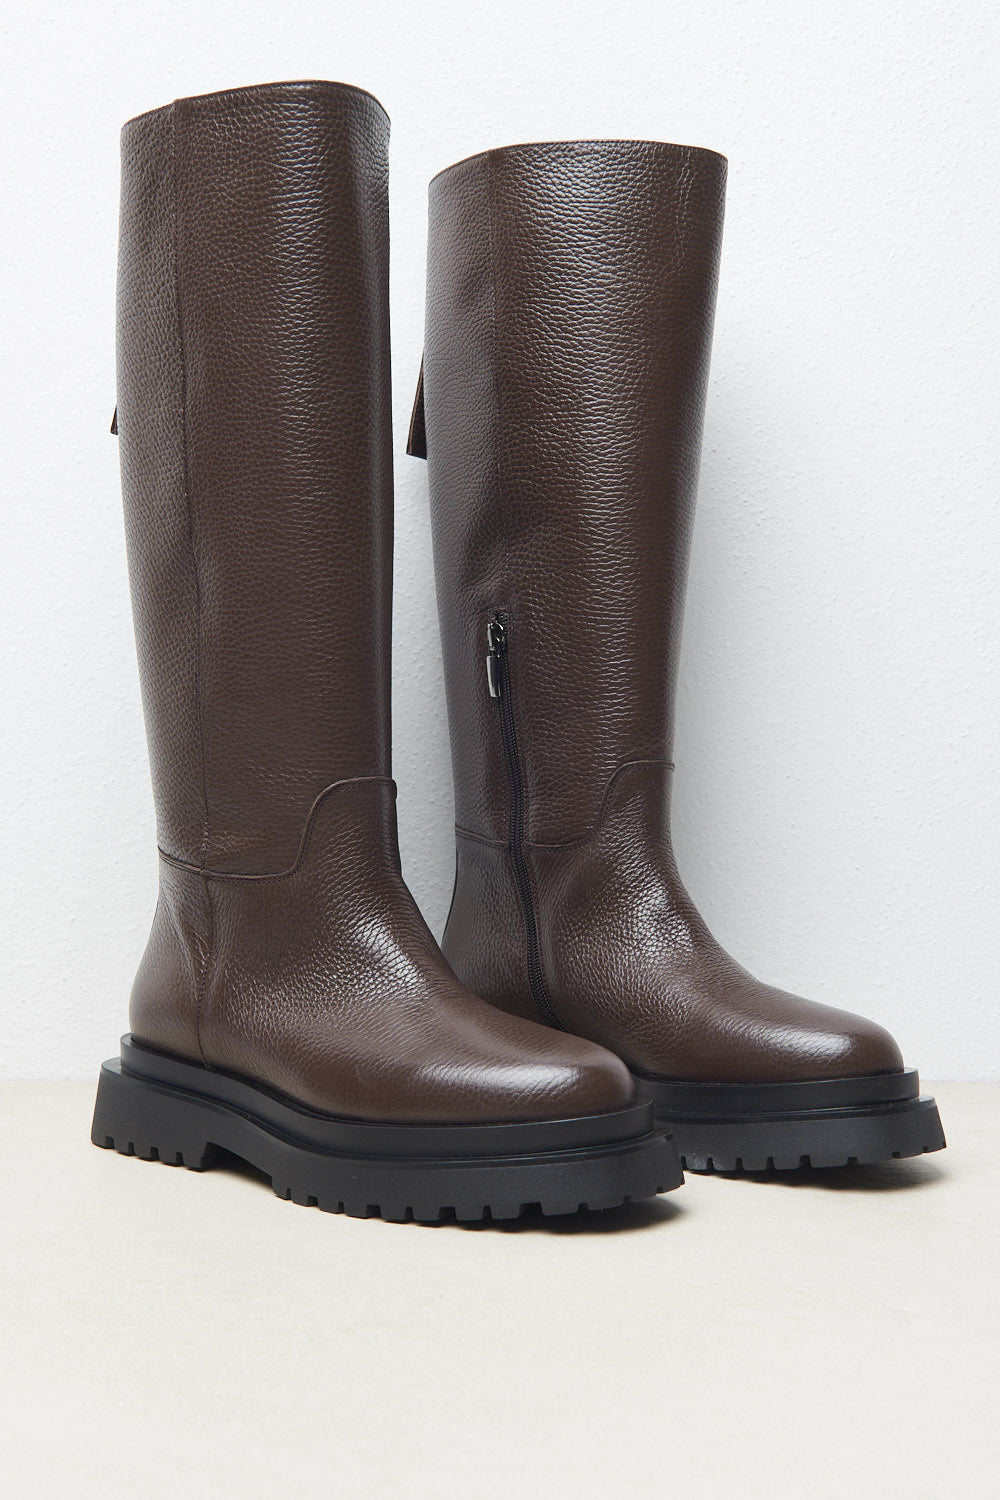 real leather tube boots